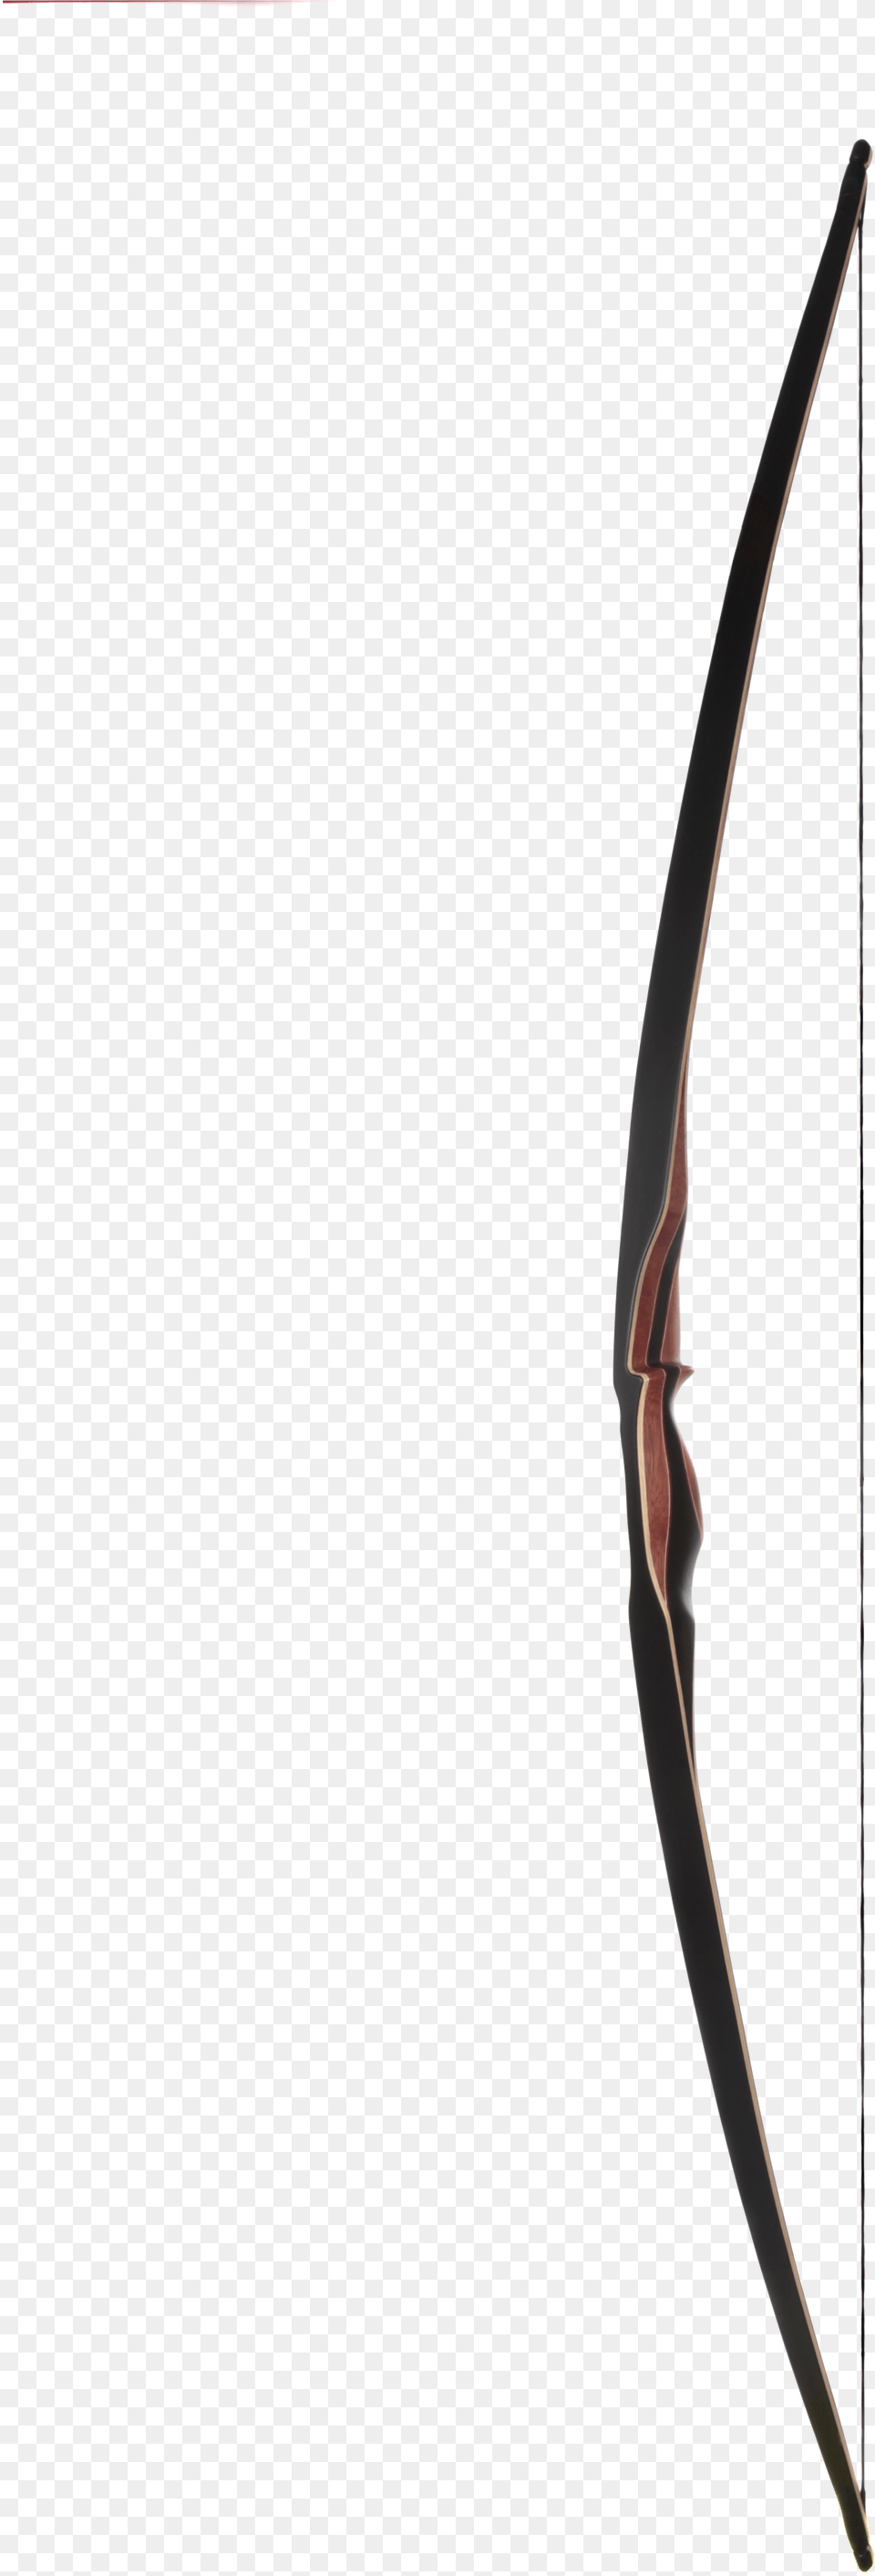 Middle Ages Larp Bows Bow And Arrow Recurve Medieval Longbow, Weapon, Sword, Archery, Sport Free Transparent Png